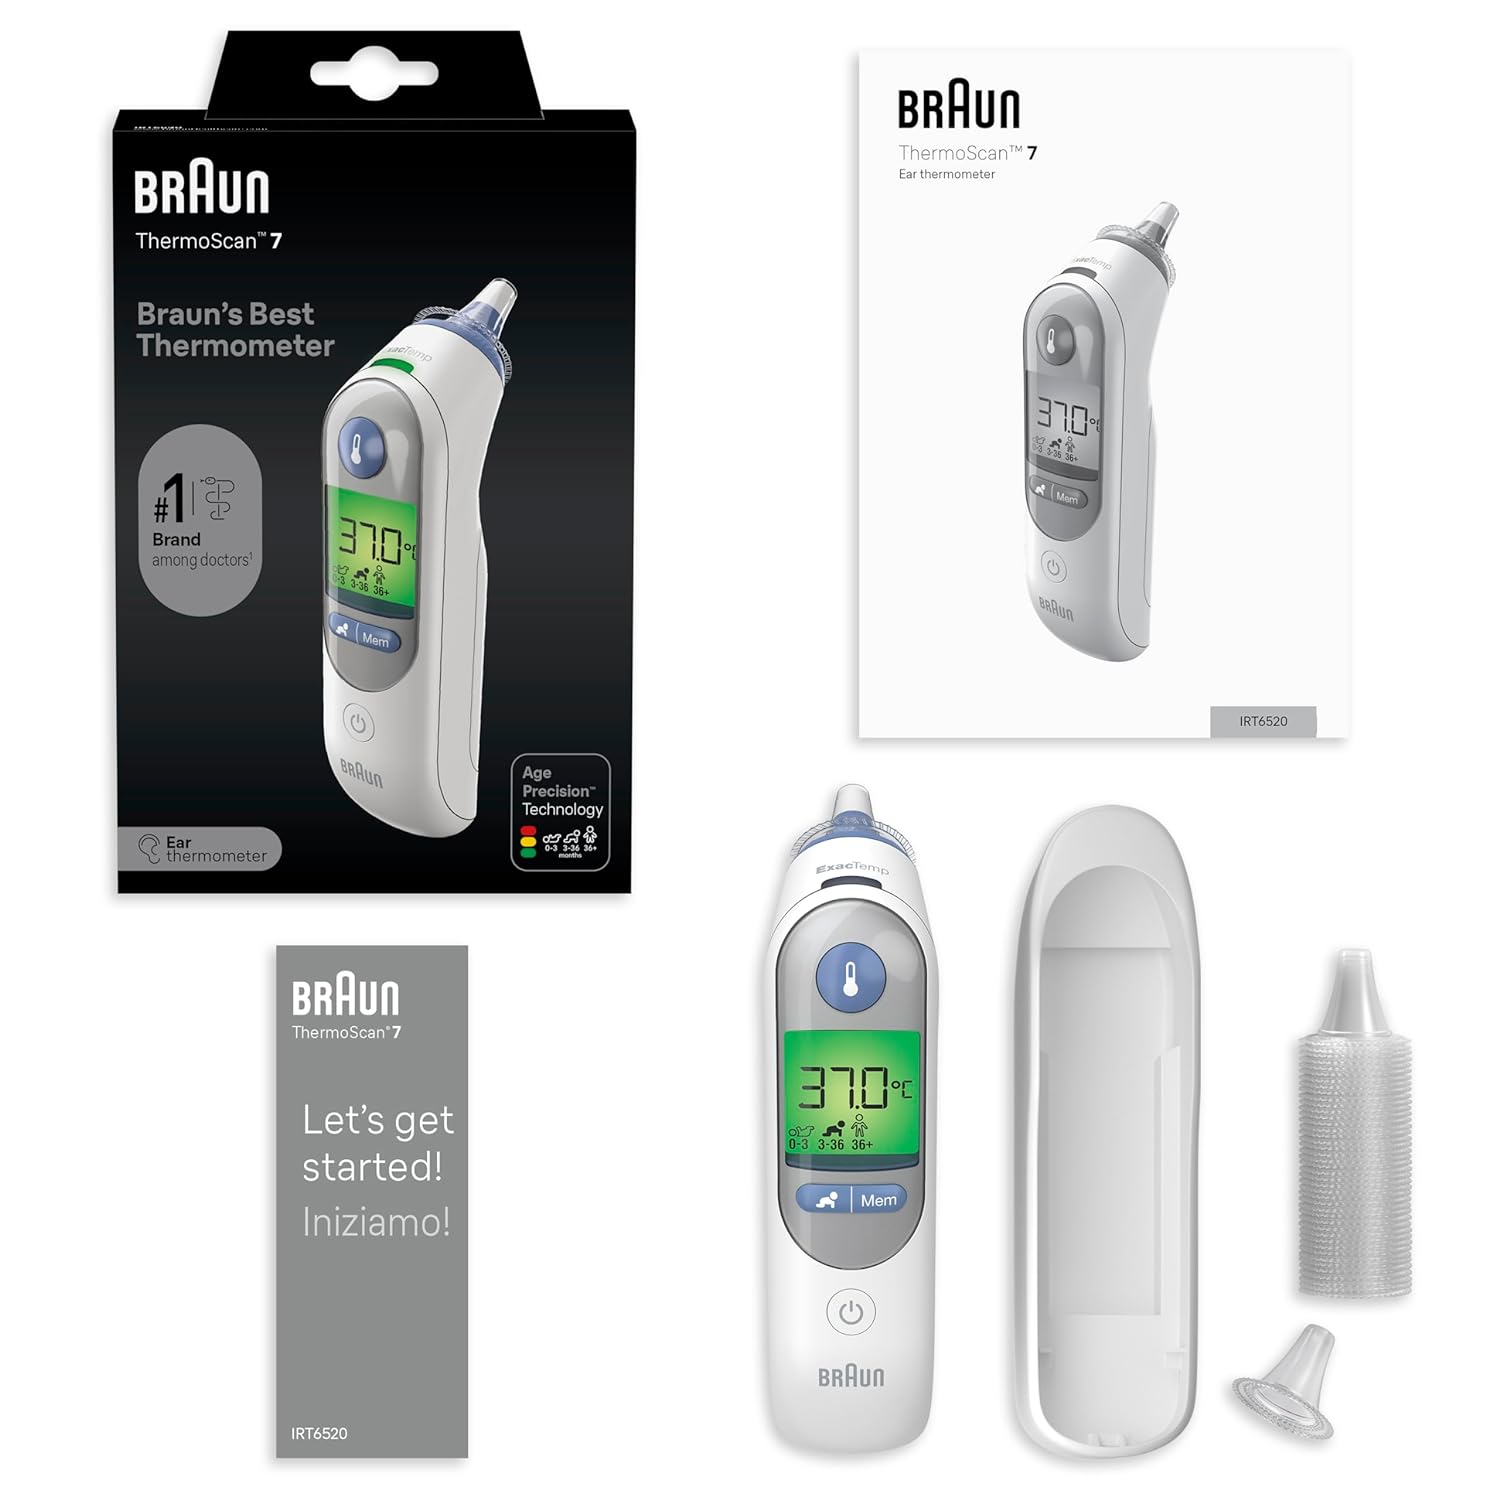 Braun Thermoscan 7 IRT6520 Digital Ear Thermometer with 21 disposable probe covers